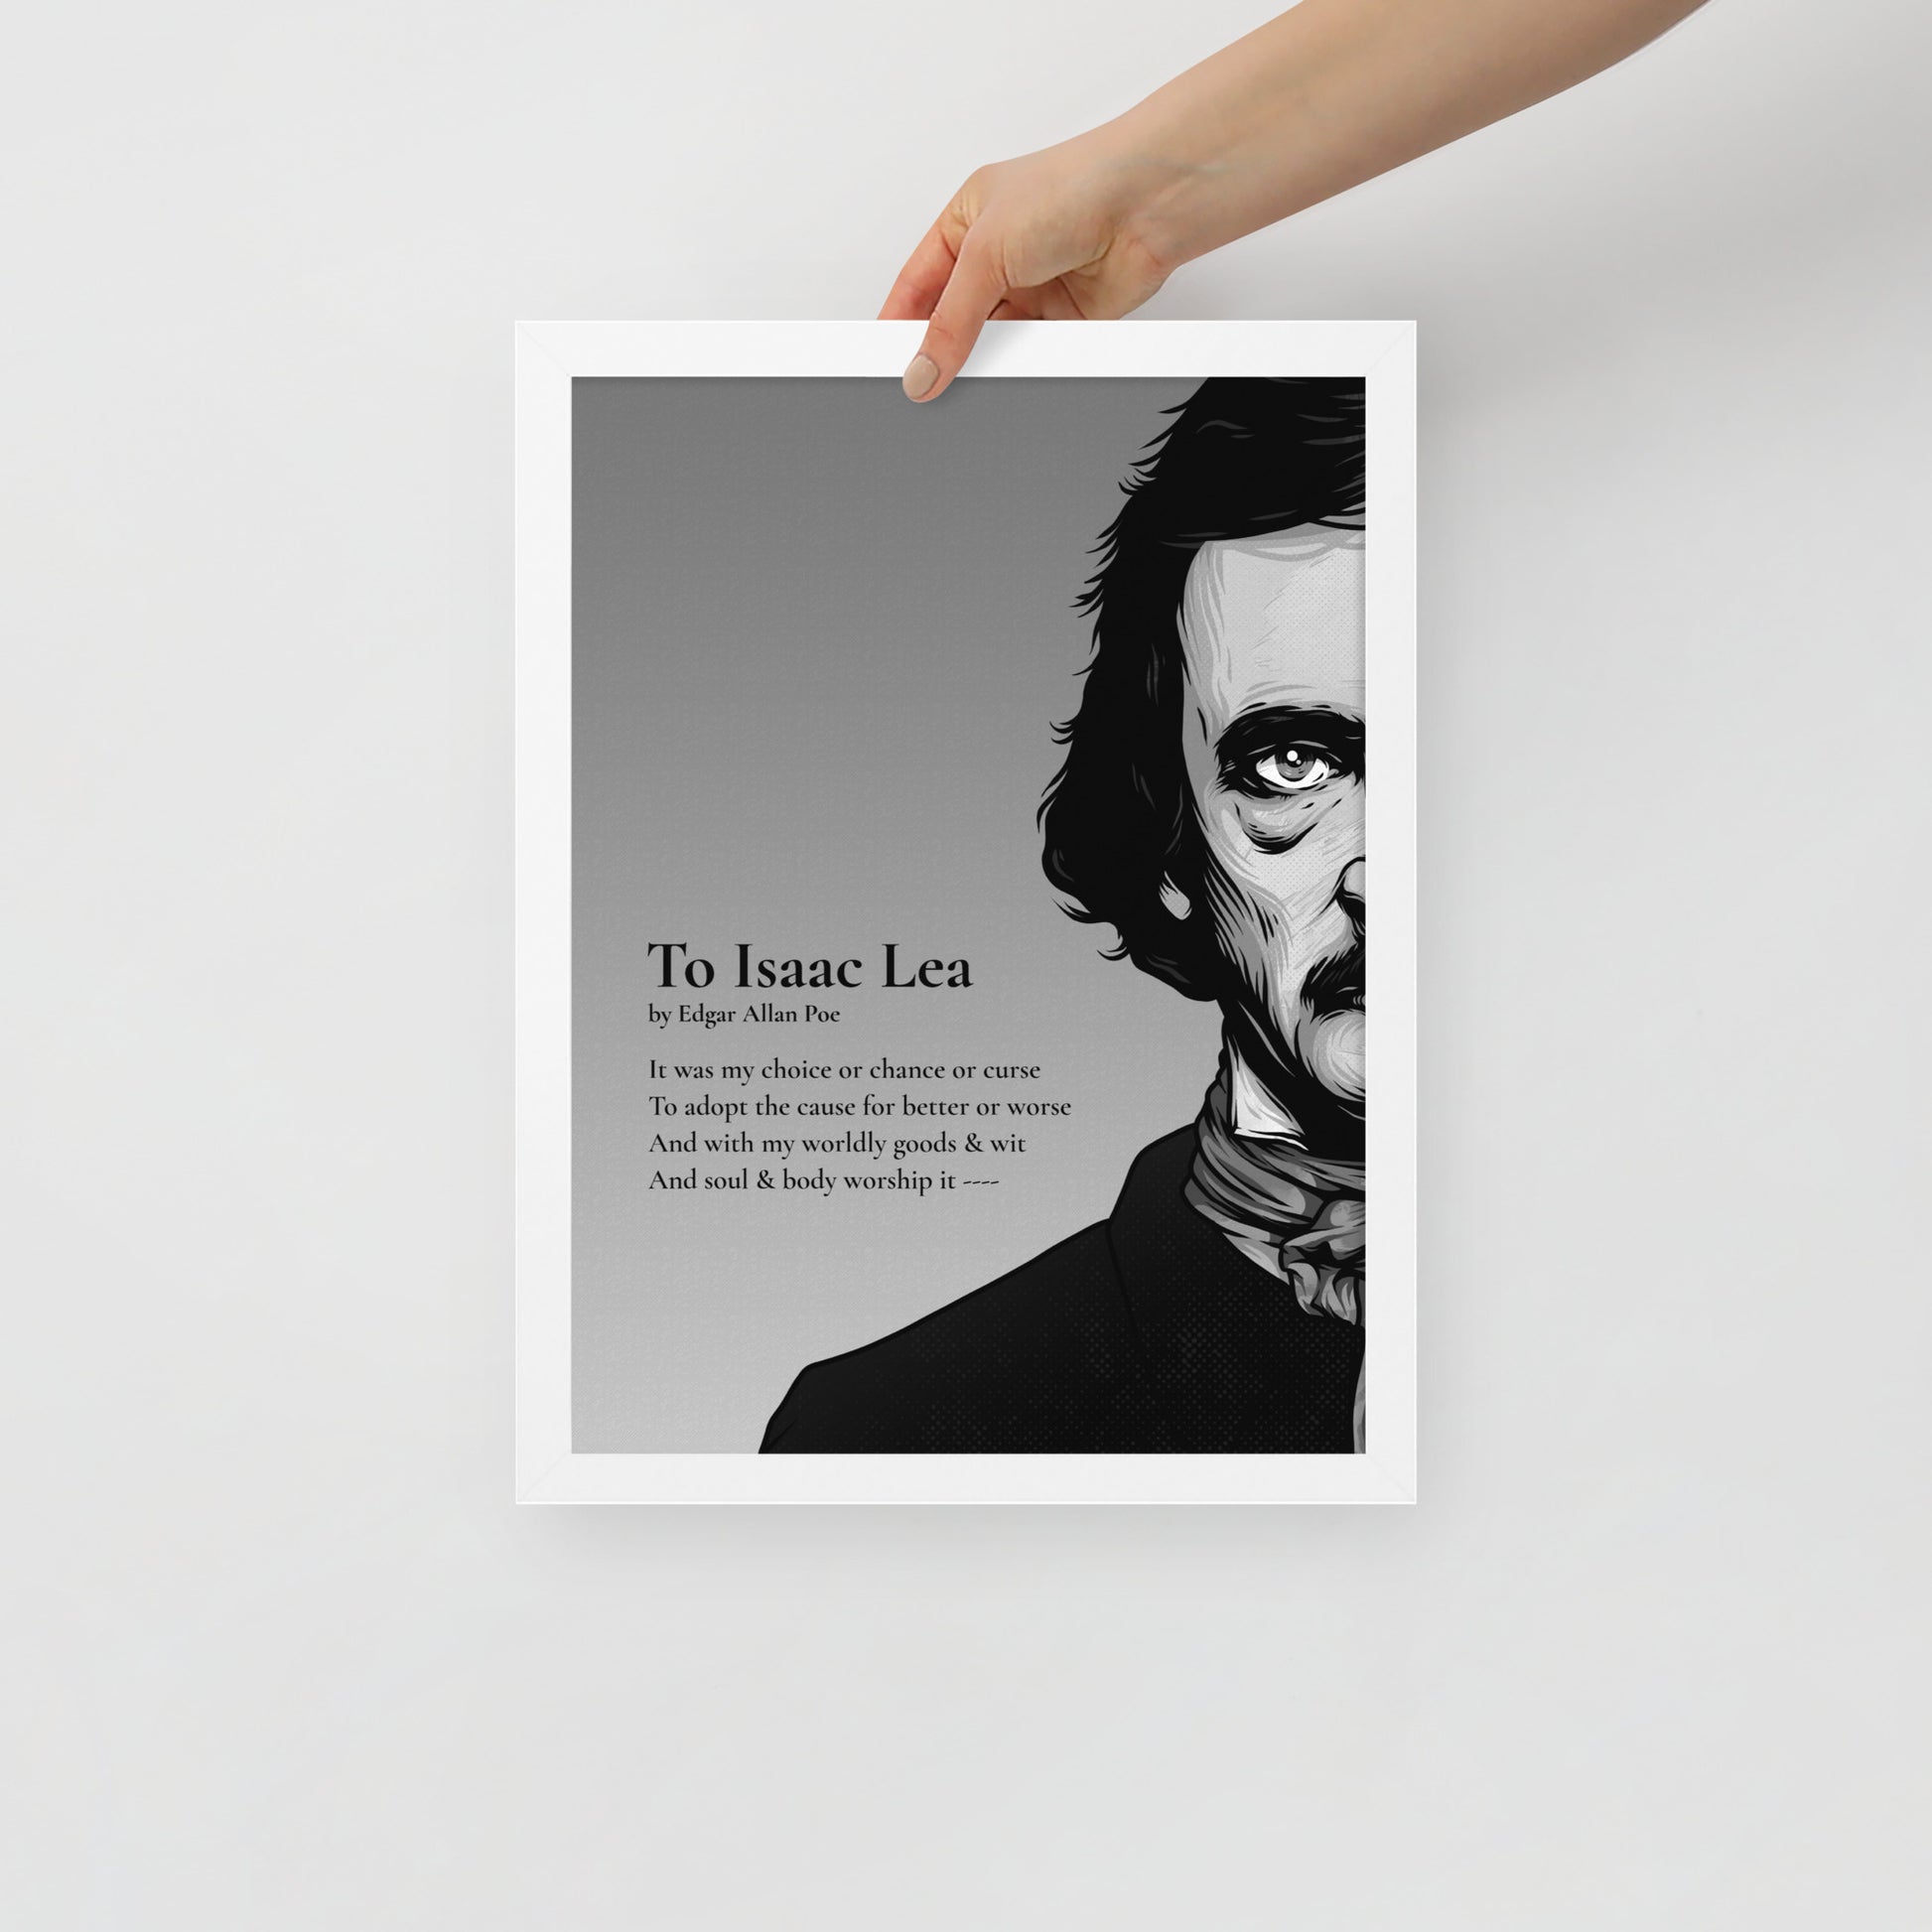 Edgar Allan Poe's 'To Isaac Lea' Framed Matted Poster - 12 x 16 White Frame